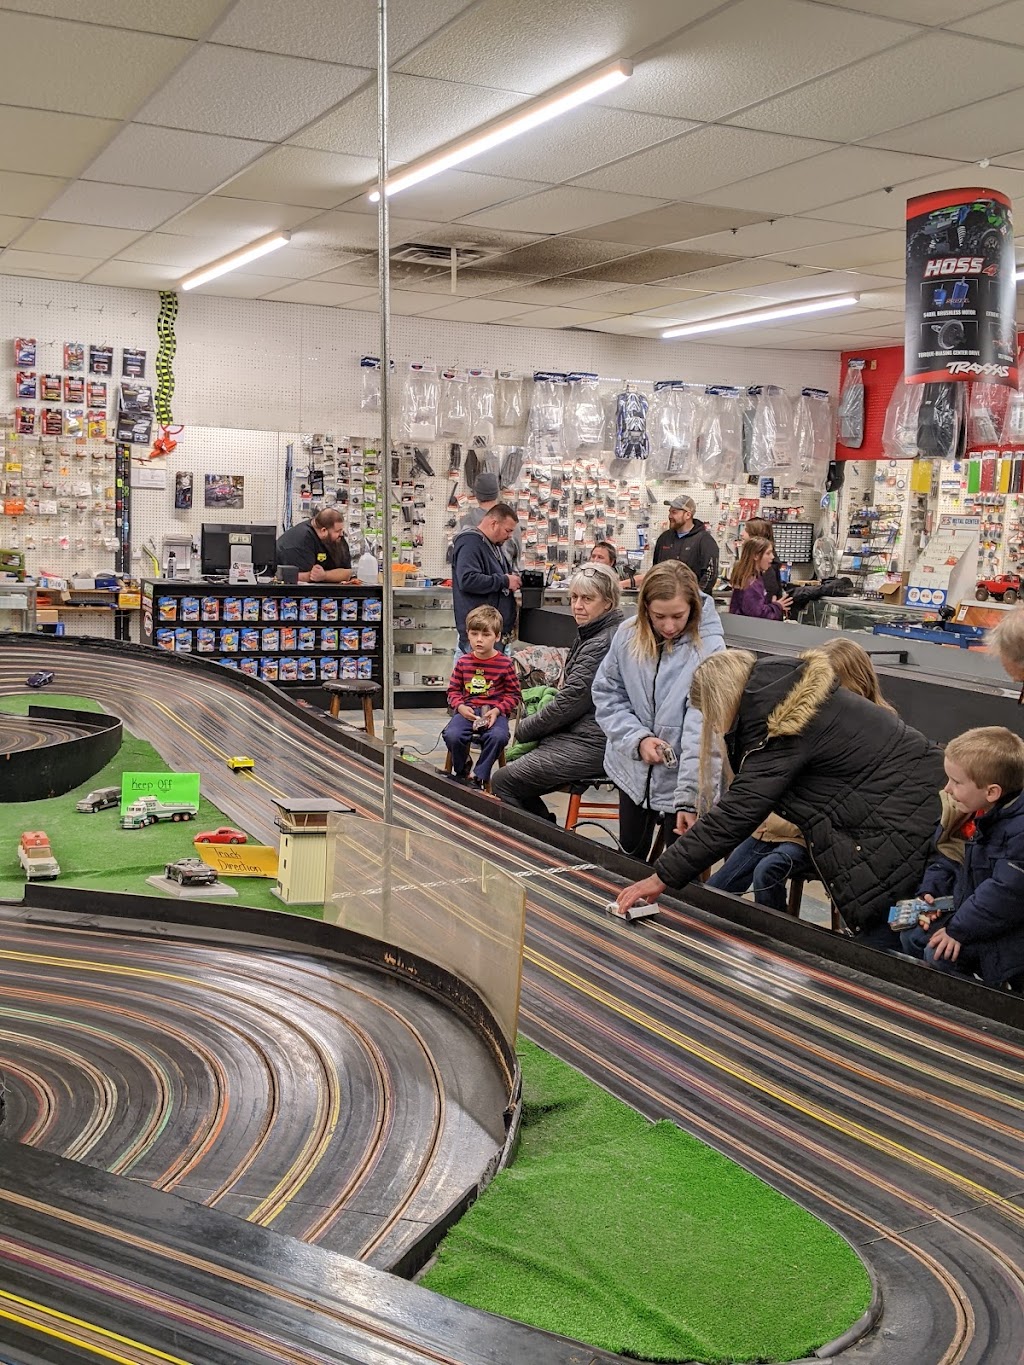 Raceplace Hobbies | 201 Station Rd, Quakertown, PA 18951 | Phone: (215) 538-2394